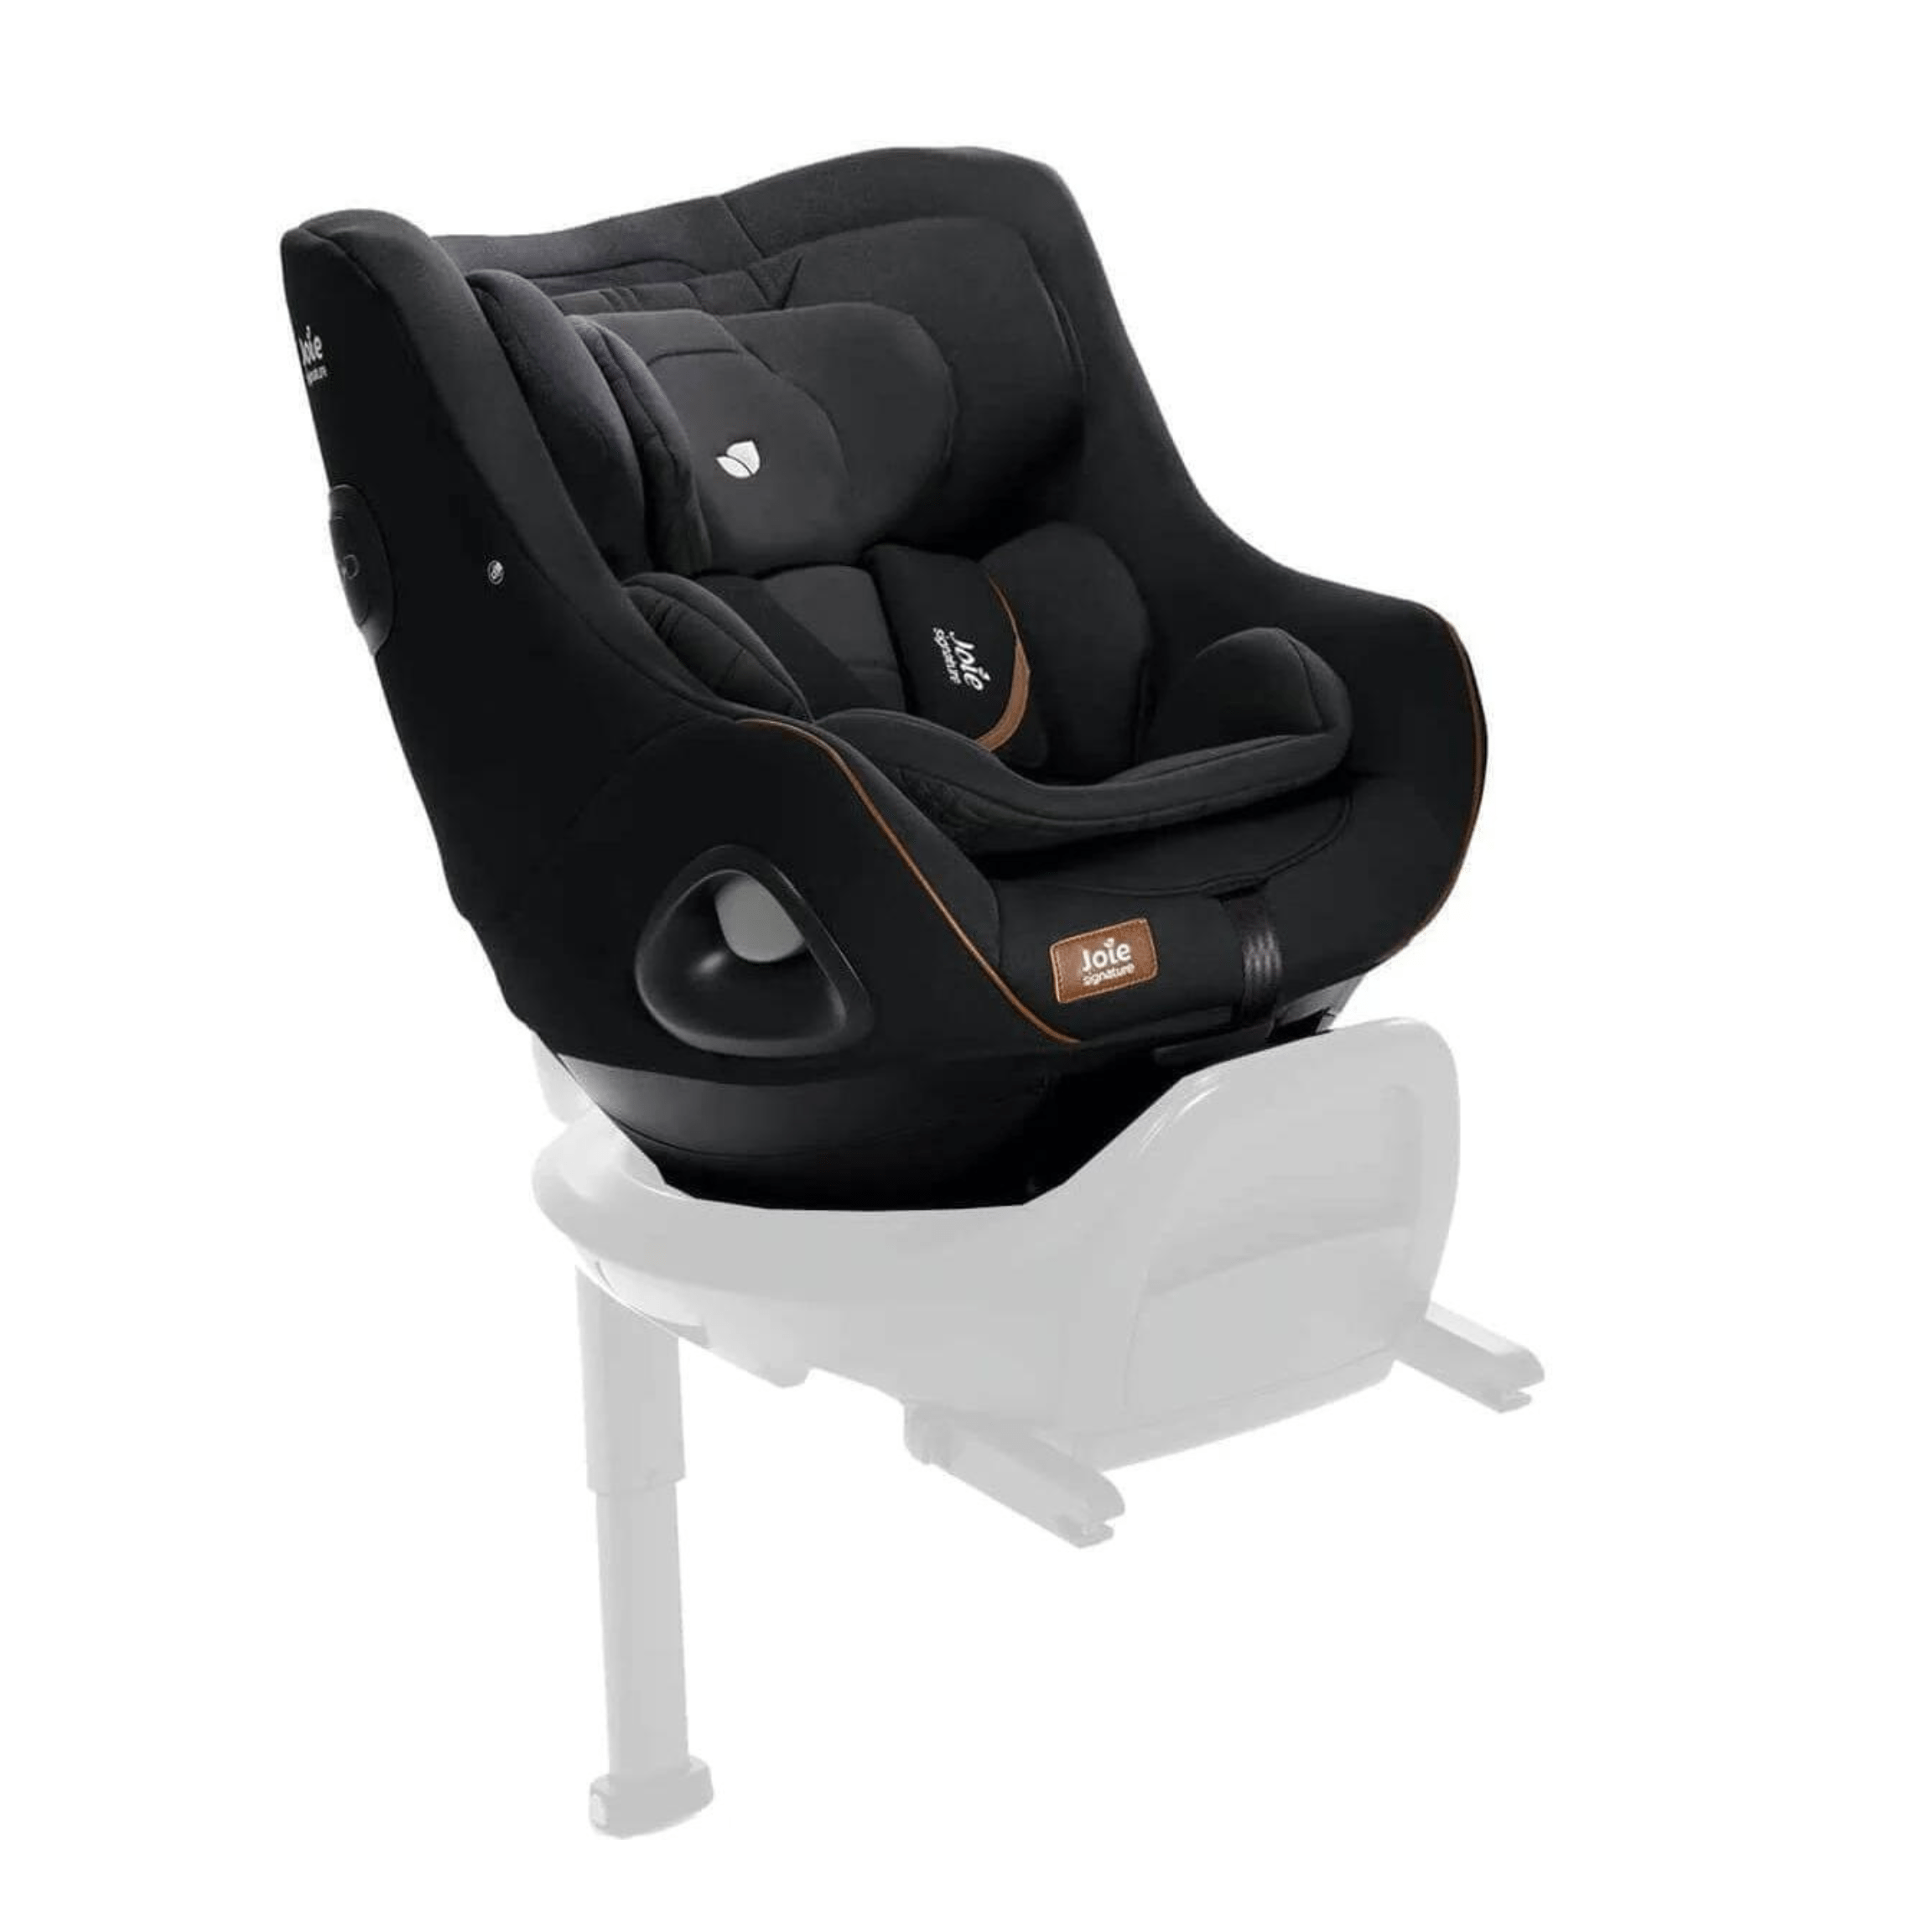 Joie i-Harbour in Eclipse Swivel Car Seats C2104AAECL000 5056080612454